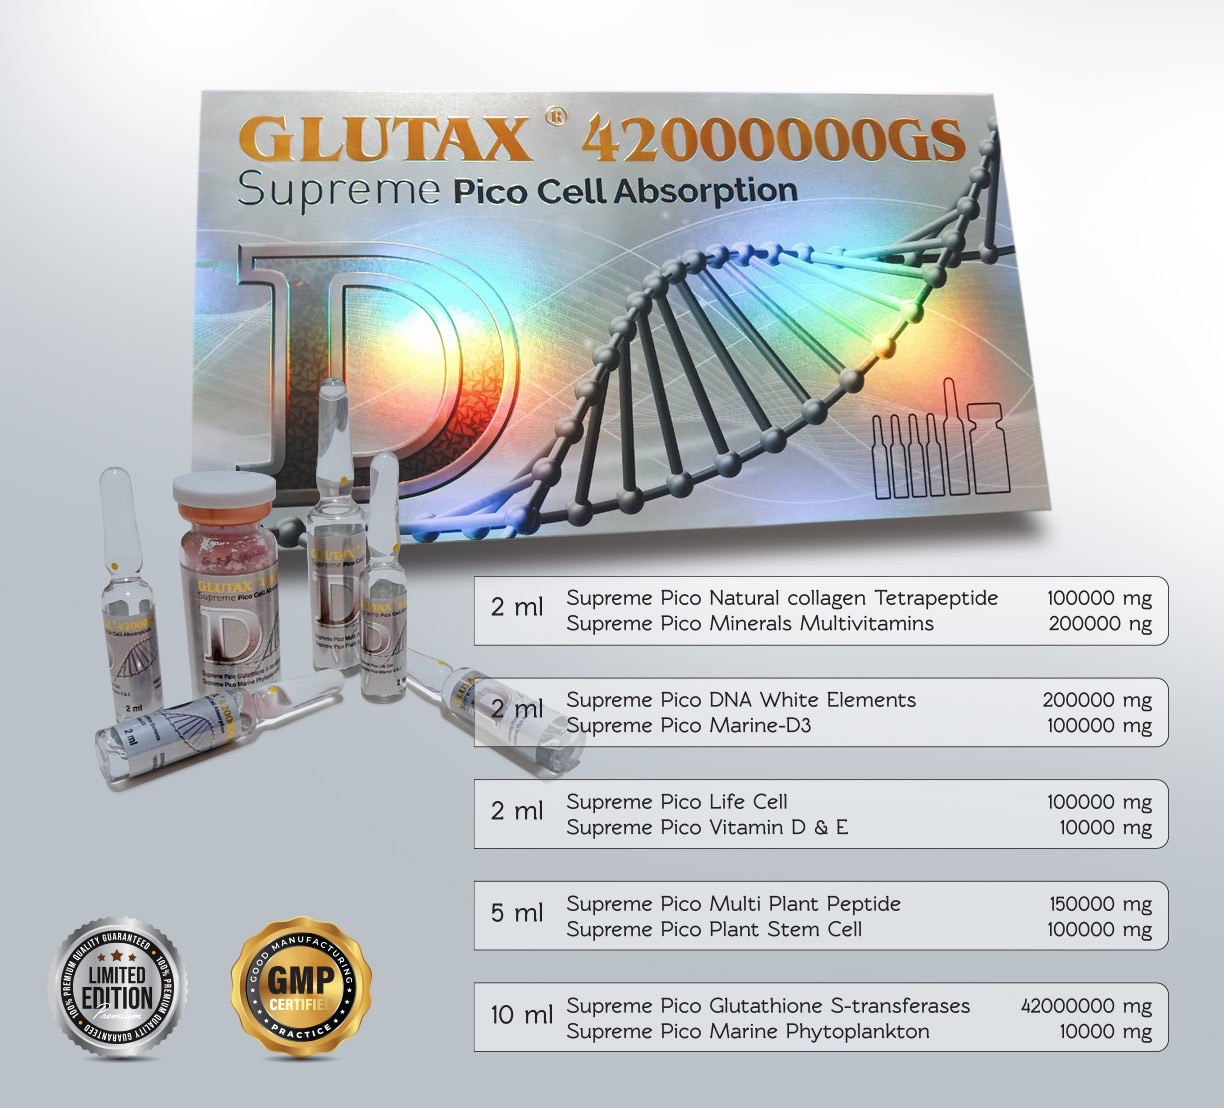 GLUTAX 42000000 GS Supreme Pico Cell Absorption